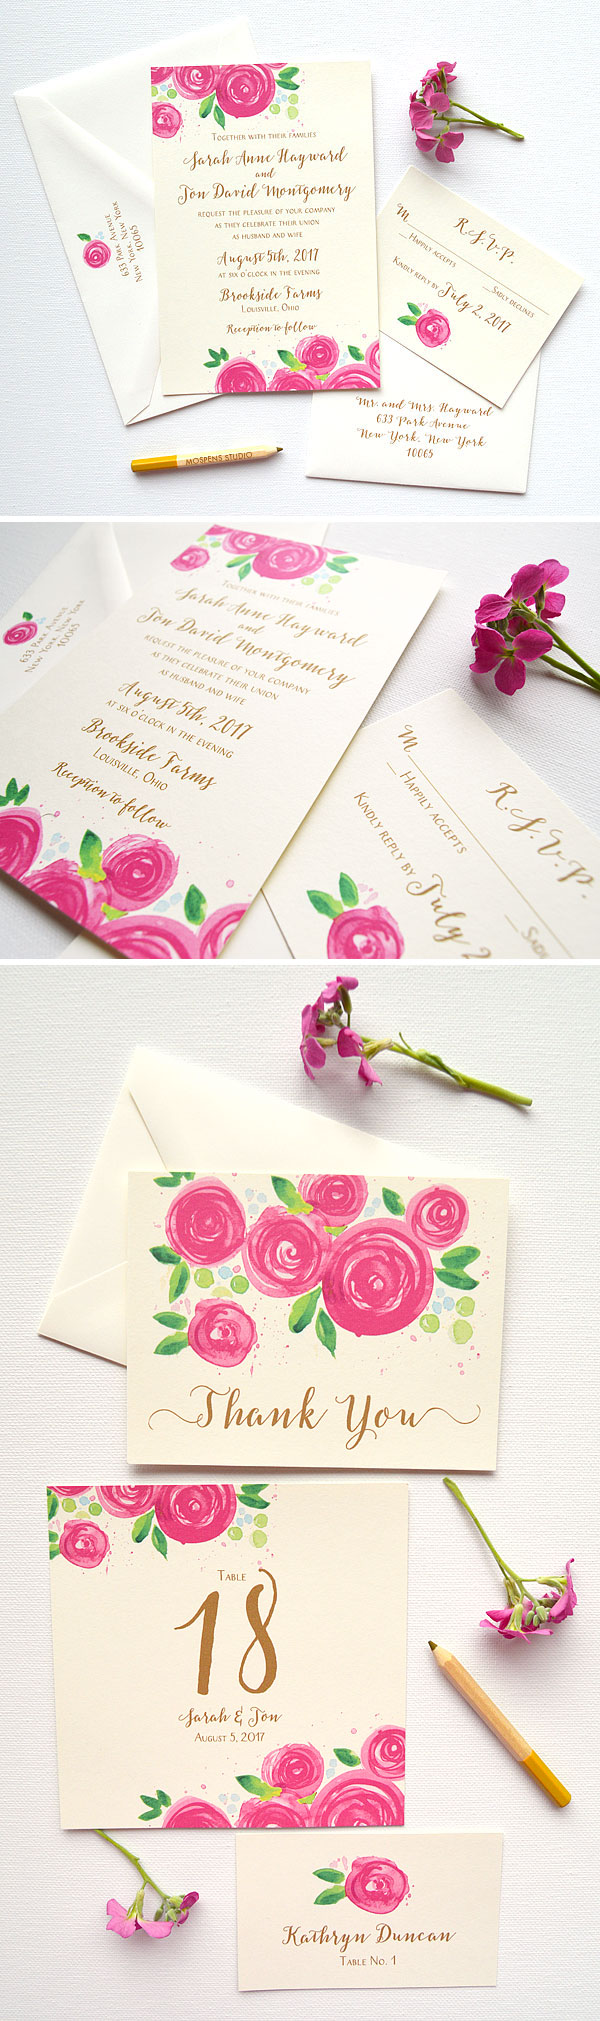 The Berry Rose Blooms Wedding Invitation design features original watercolor rose artwork on thick buttercream cards, and modern fonts in beautiful aged gold flat matte ink. Letterpress and raised ink upgrades available! - www.mospensstudio.com